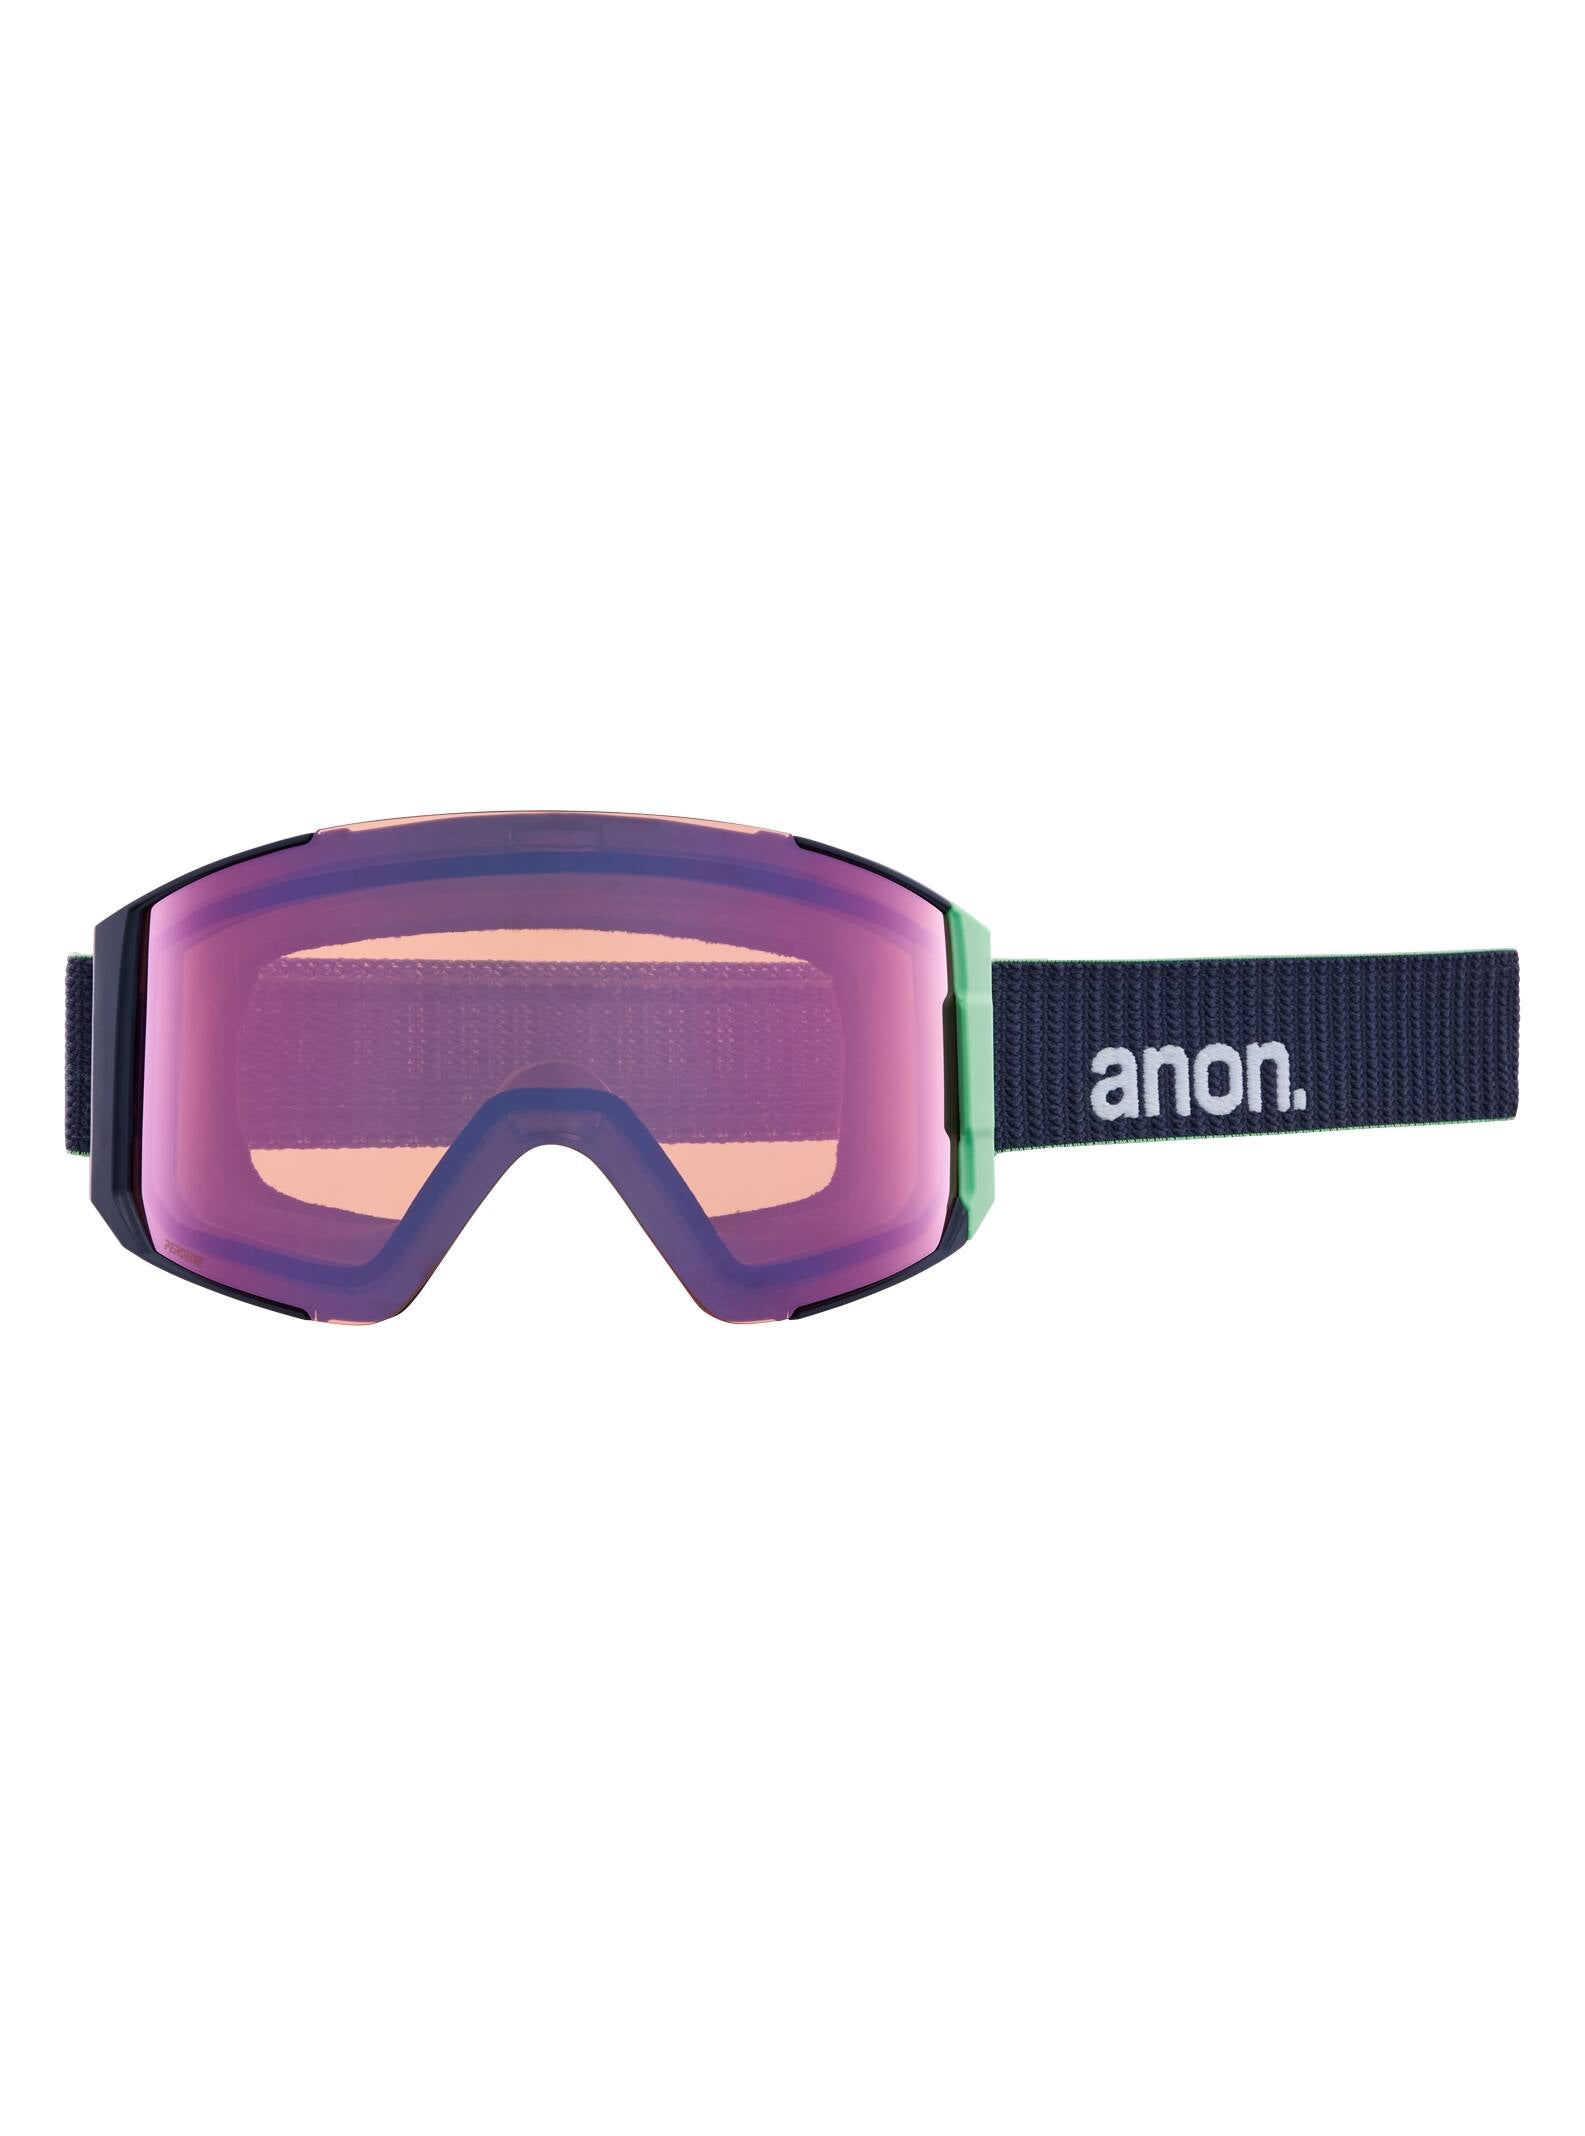 Anon Anon Sync Goggles + Bonus Lens Frame: navy, lens: perceive variable blue (21% / s2), spare lens: perceive cloudy pink (53% / s1)